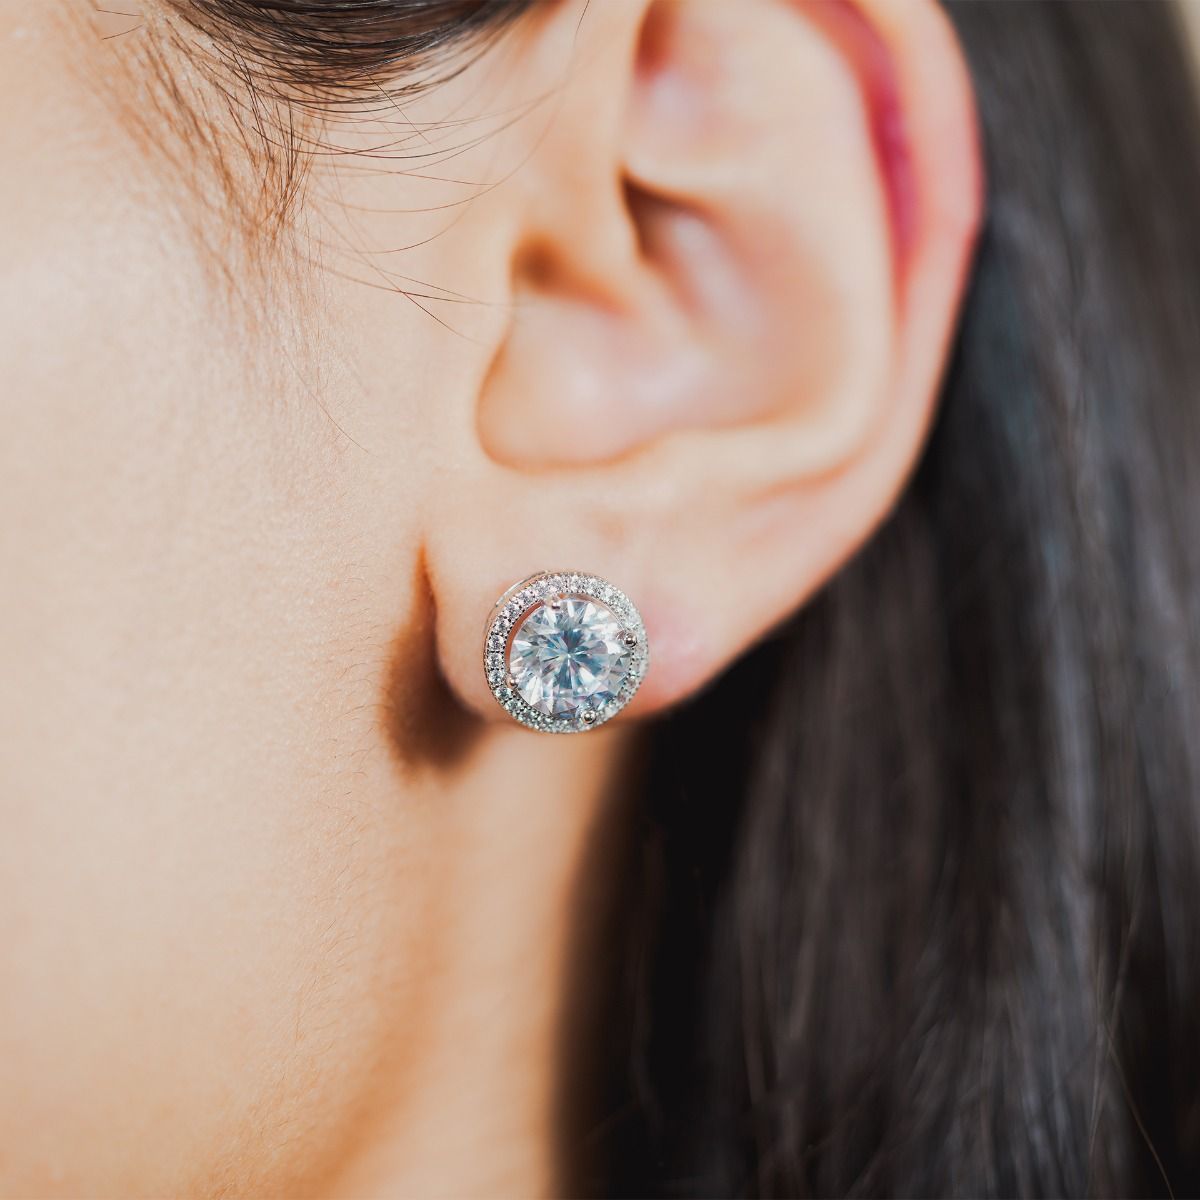 These dazzling stud earrings are set with a halo of flawlessly cut cubic zirconia stones, surrounding a dazzling round clear centre stone for a diamond inspired look. Wear to add timeless glamour to any look.